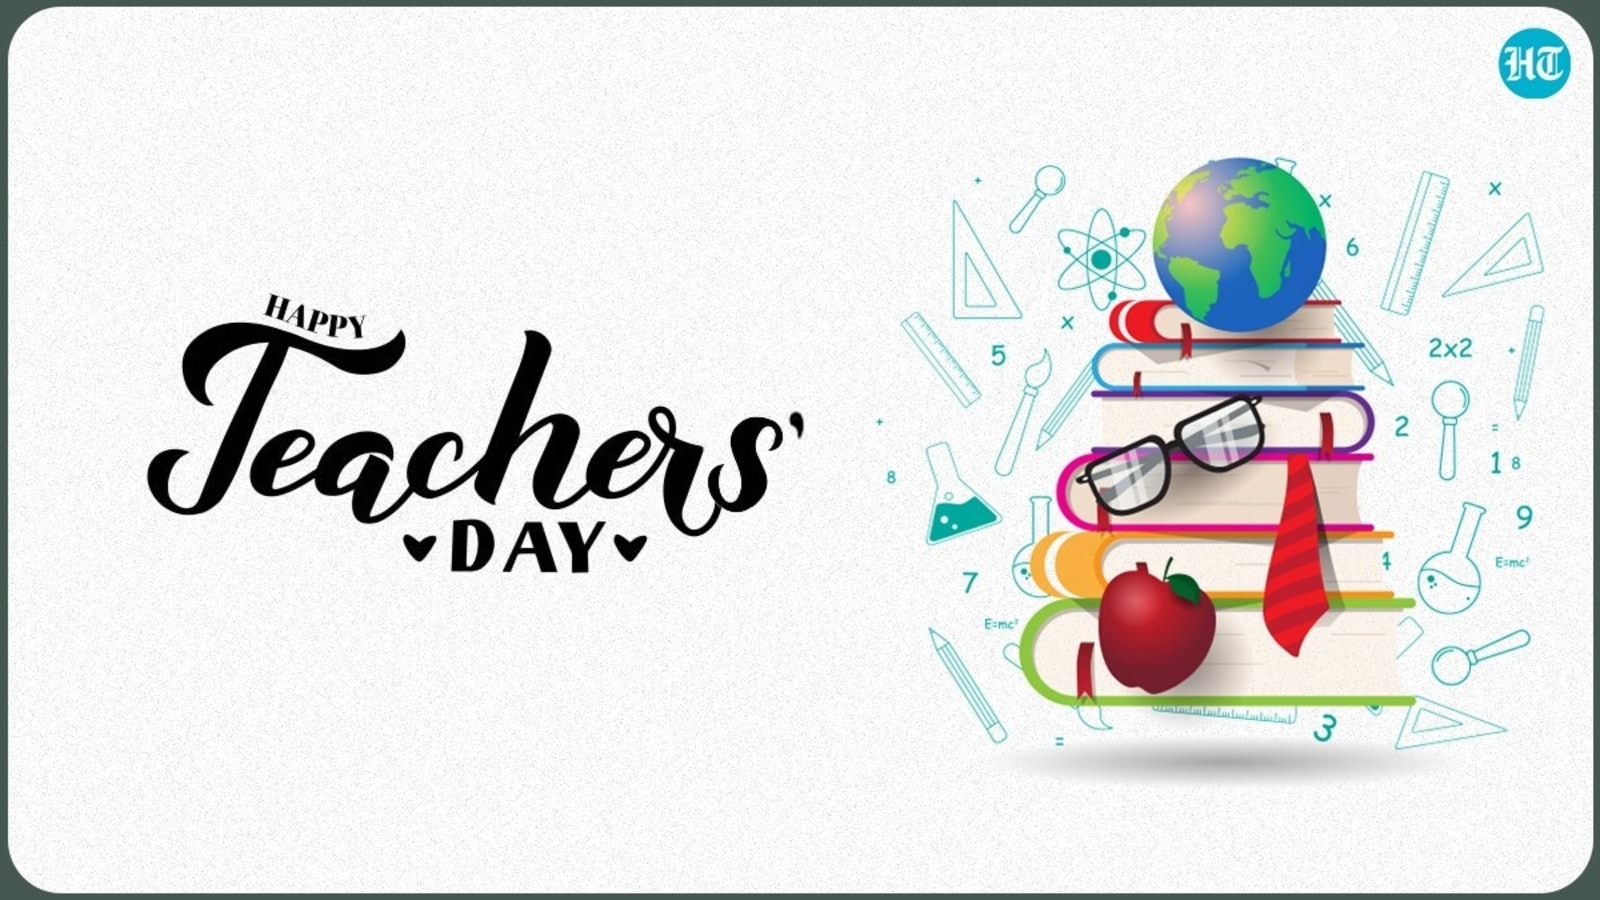 Happy Teachers' Day 2021: Best wishes, quotes, image, messages to celebrate your teacher